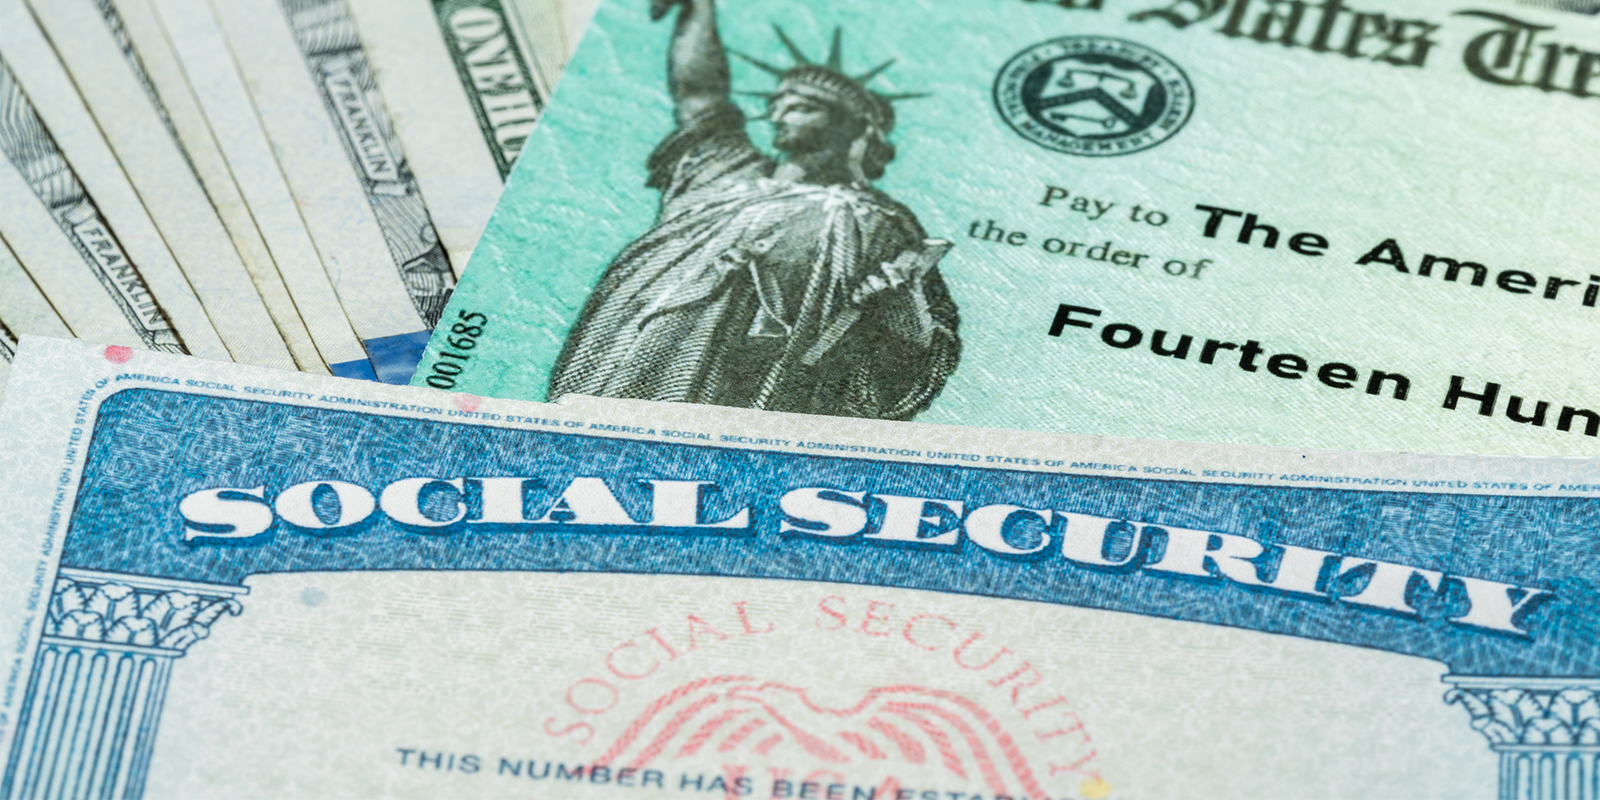 On the anniversary of the Social Security Act, let’s fix its flaws